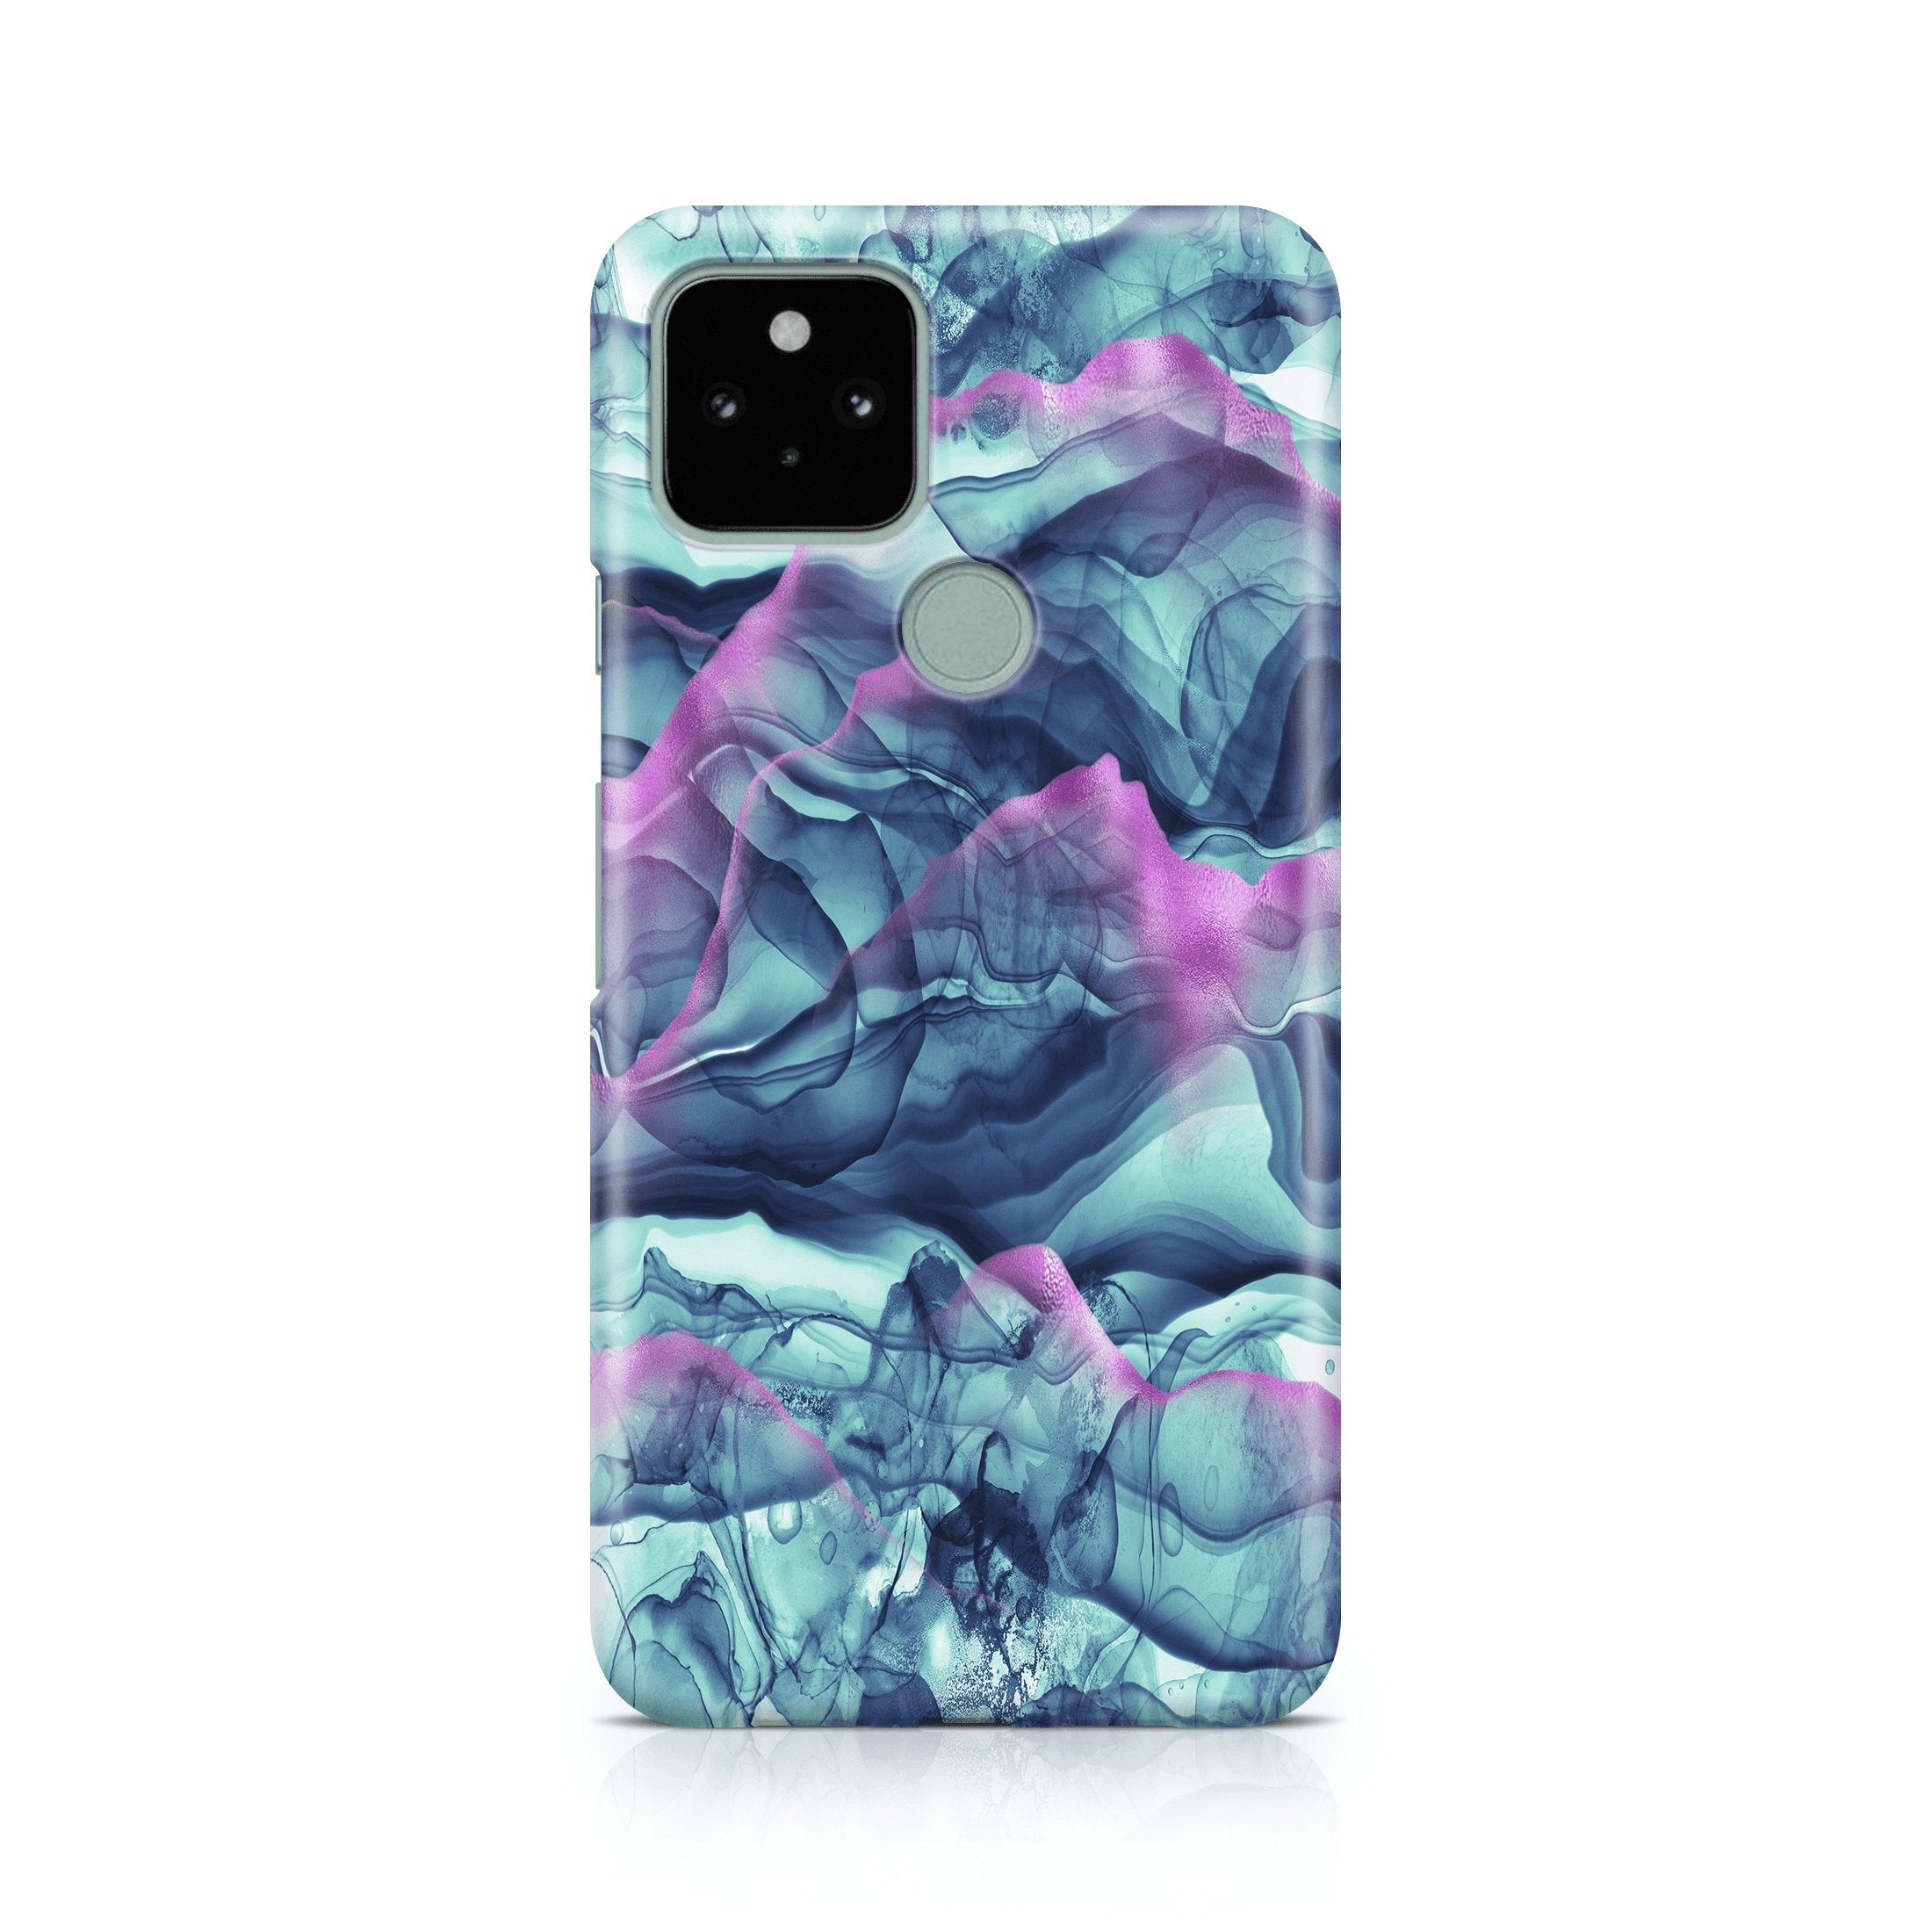 Teal Wisps - Google phone case designs by CaseSwagger